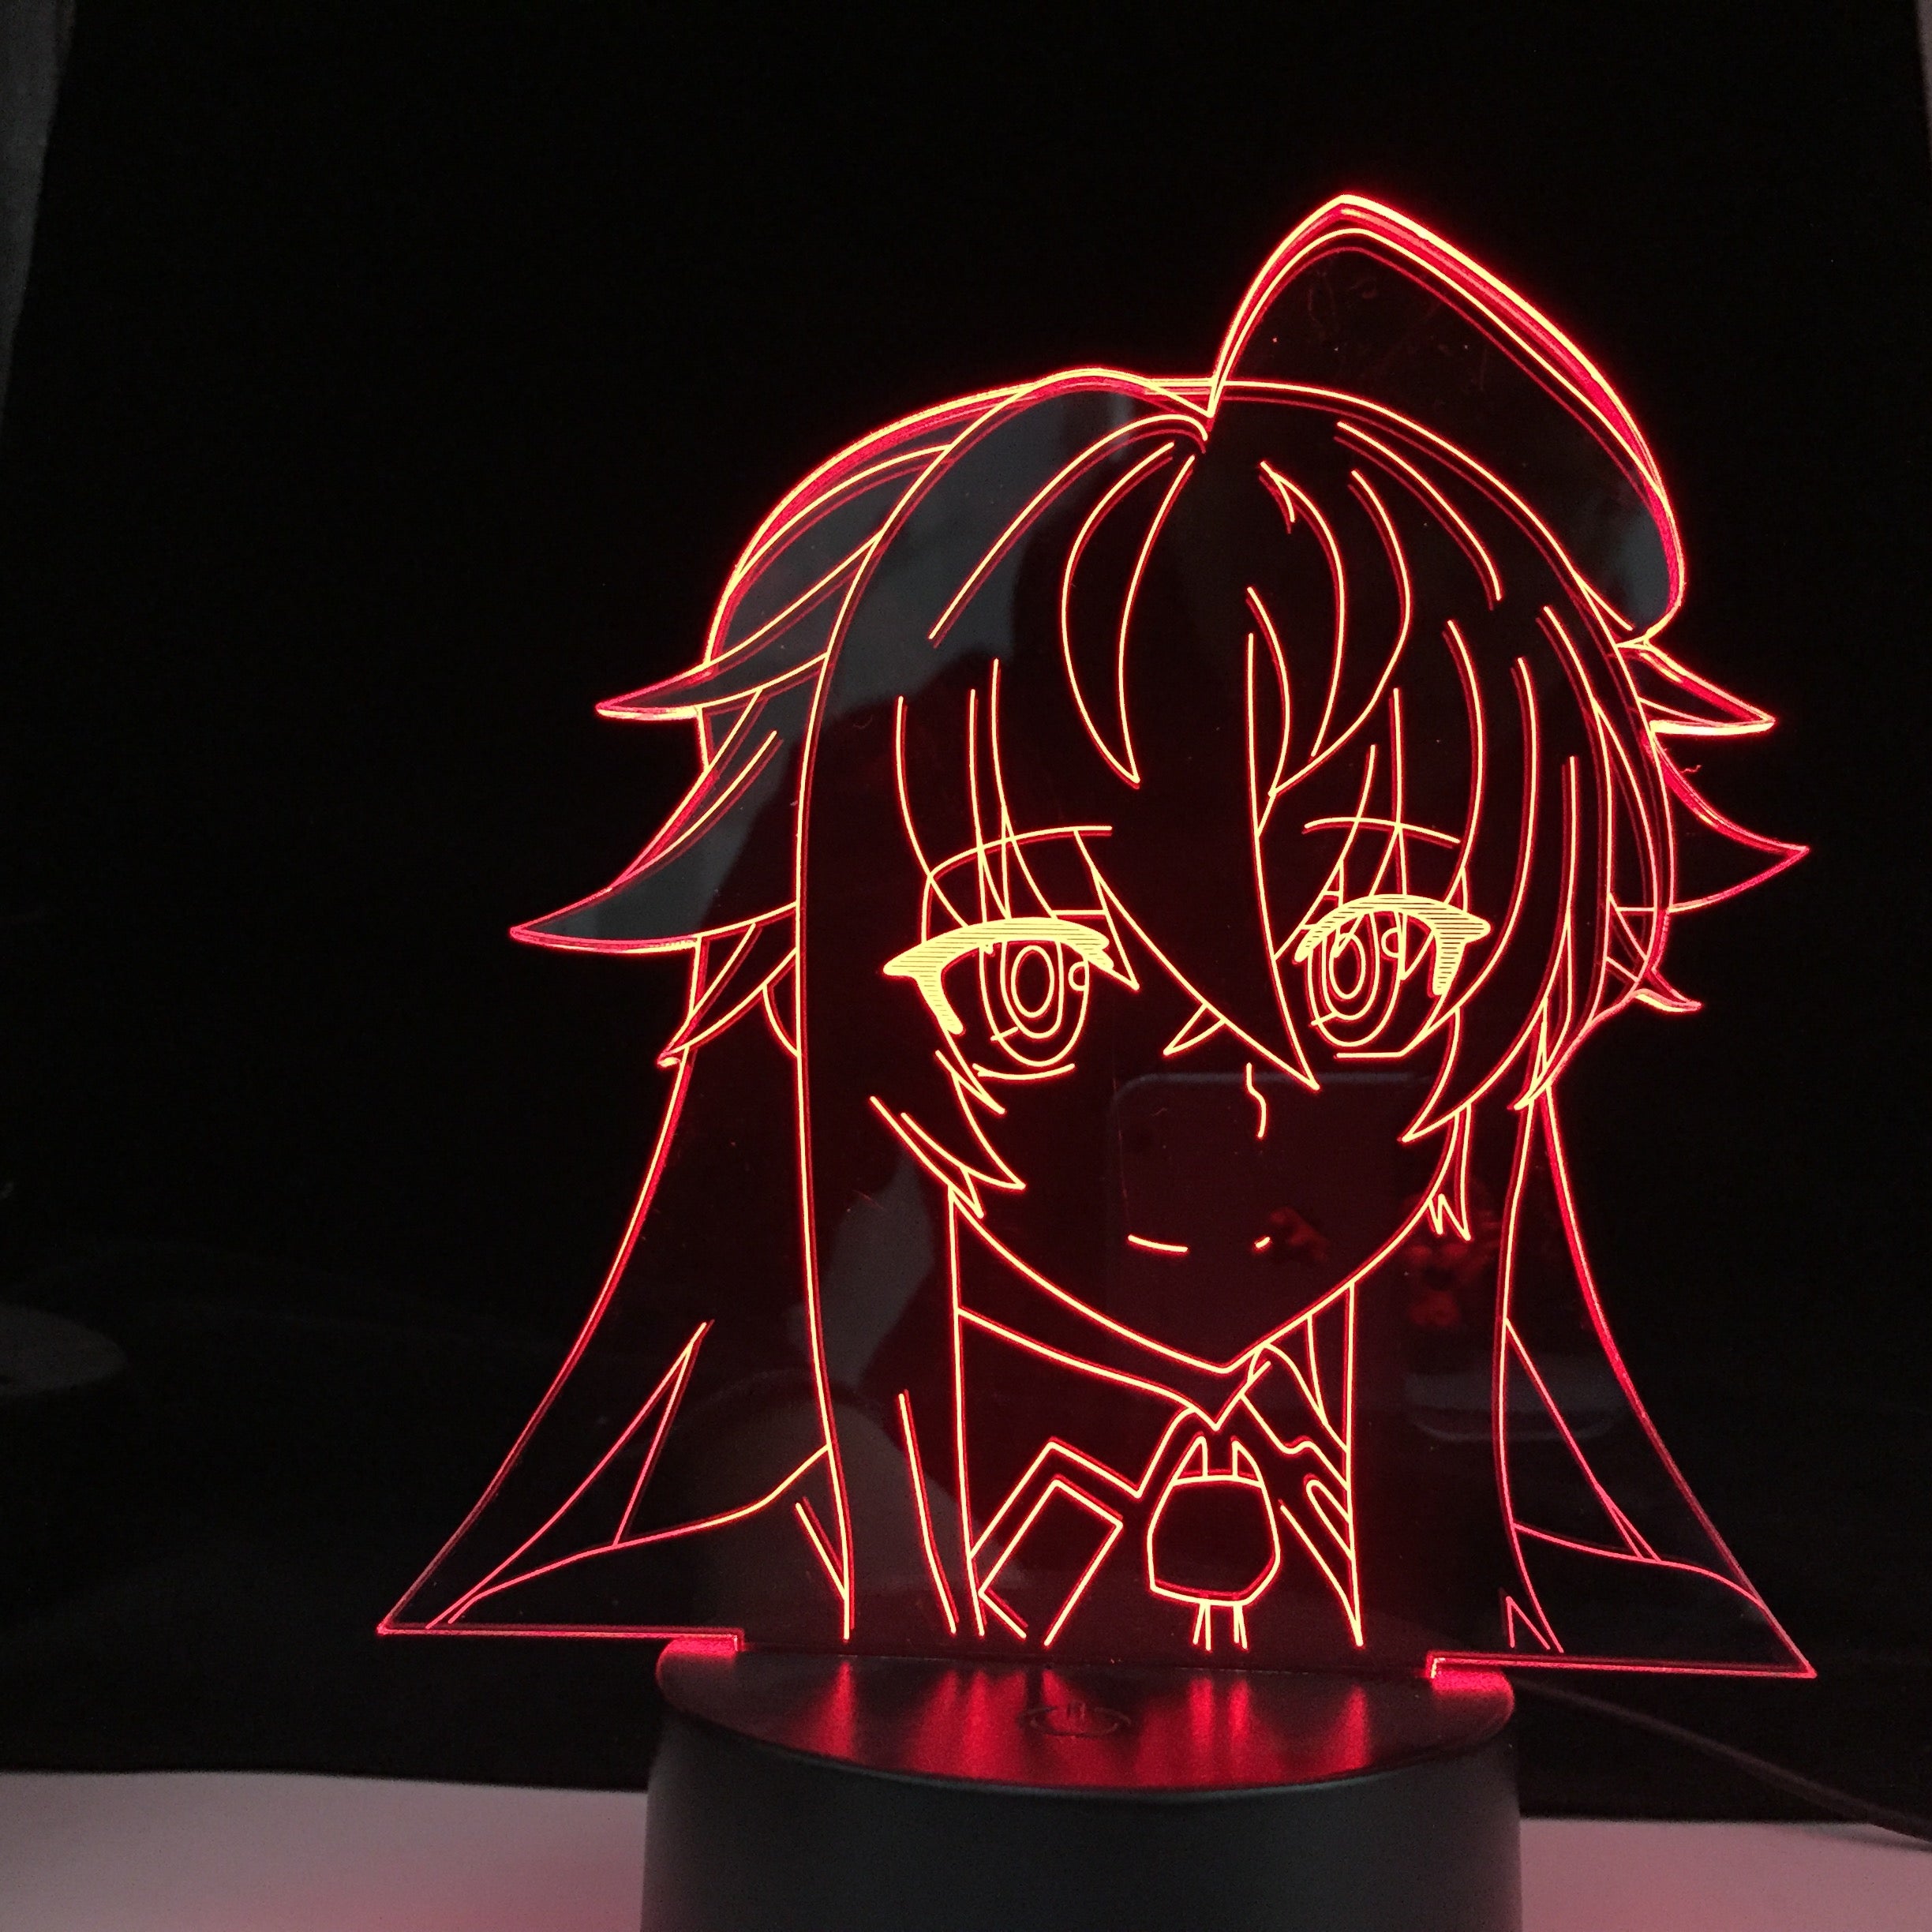 High School DxD Anime Led Light for Home Decoration Birthday Gift Manga 3D Night Lamp Rias Gremory High School DxD Dropshipping